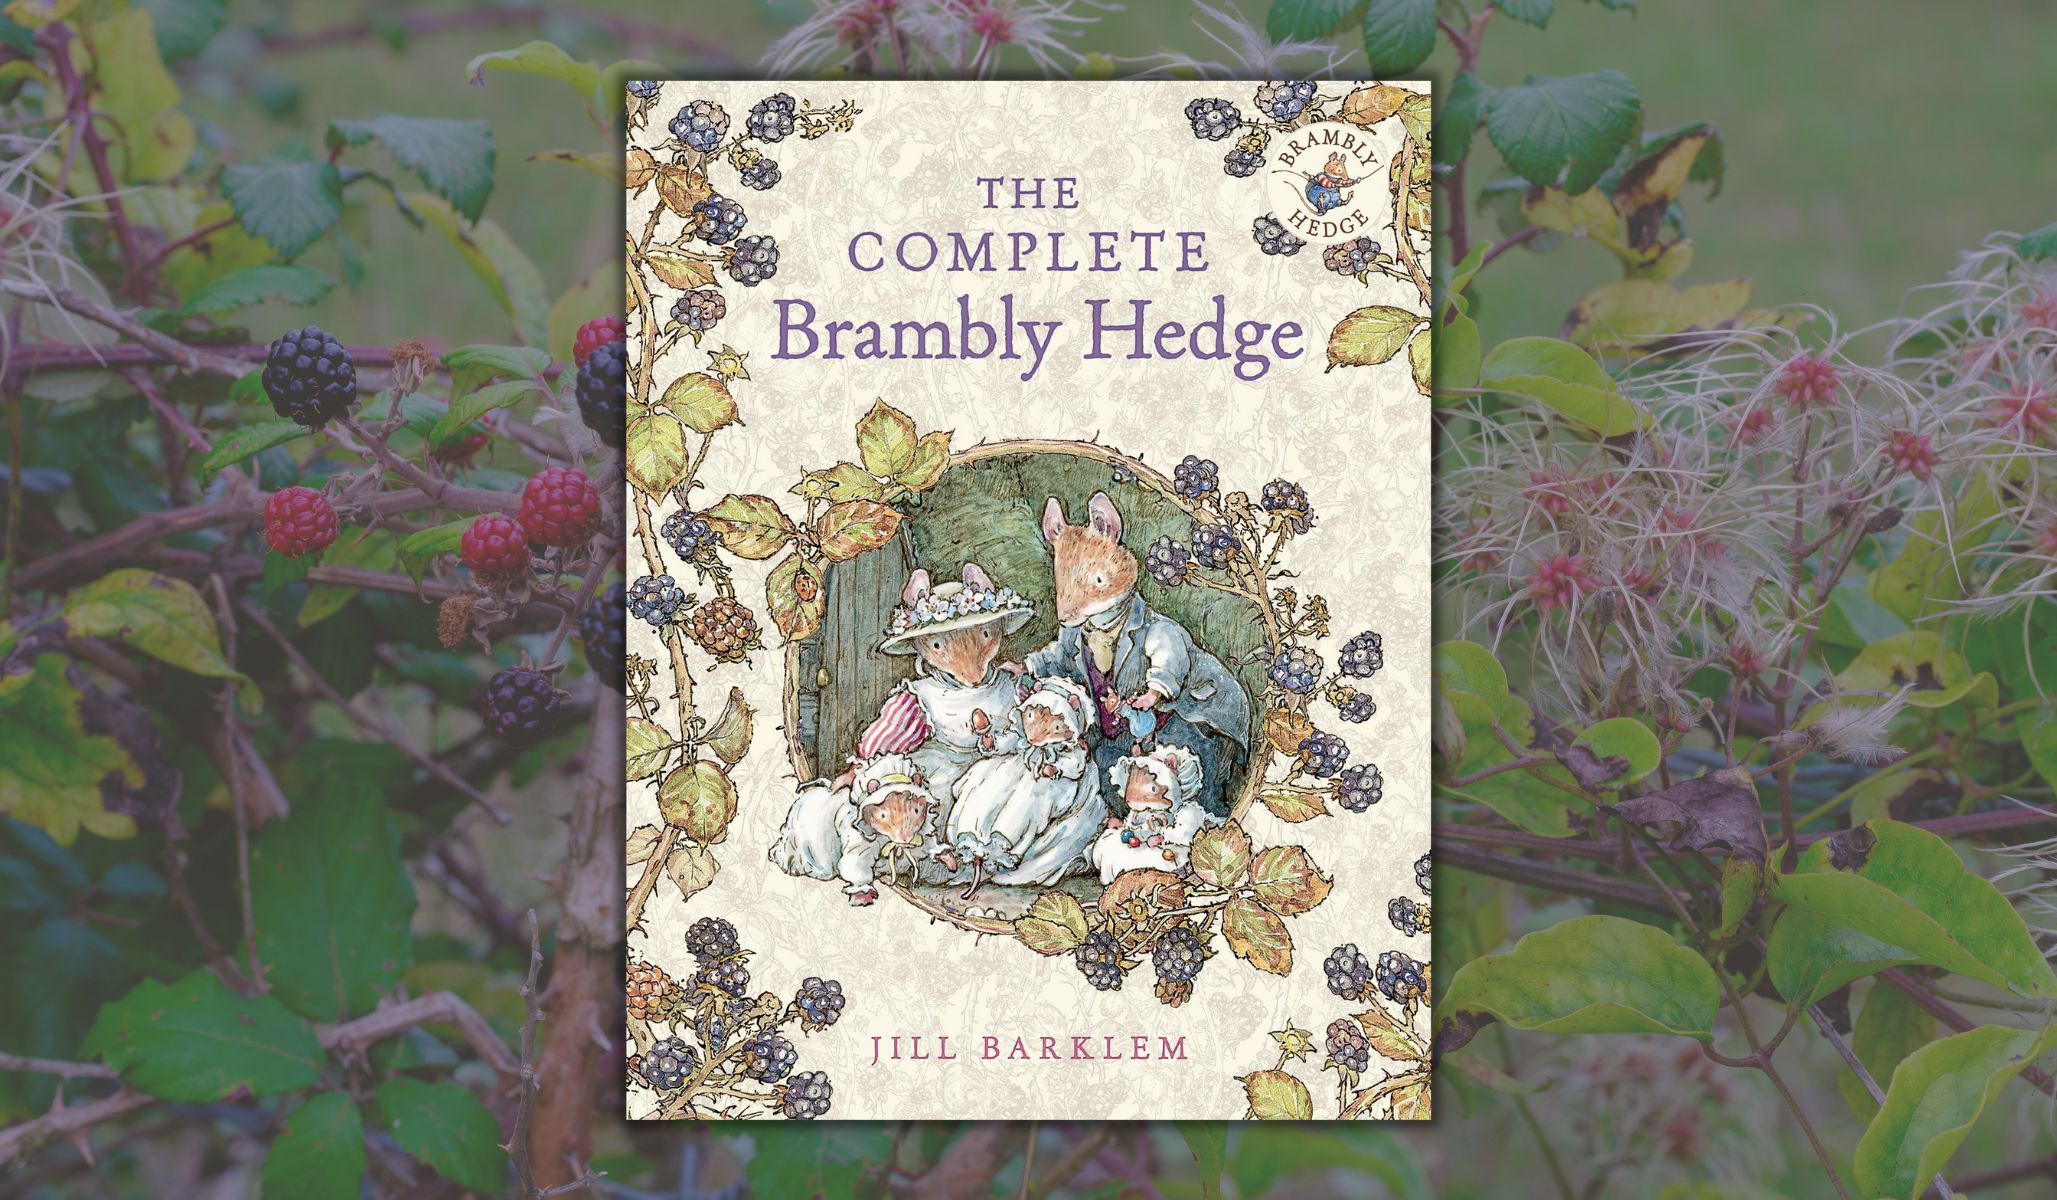 While Away Some Hours in Brambly Hedge